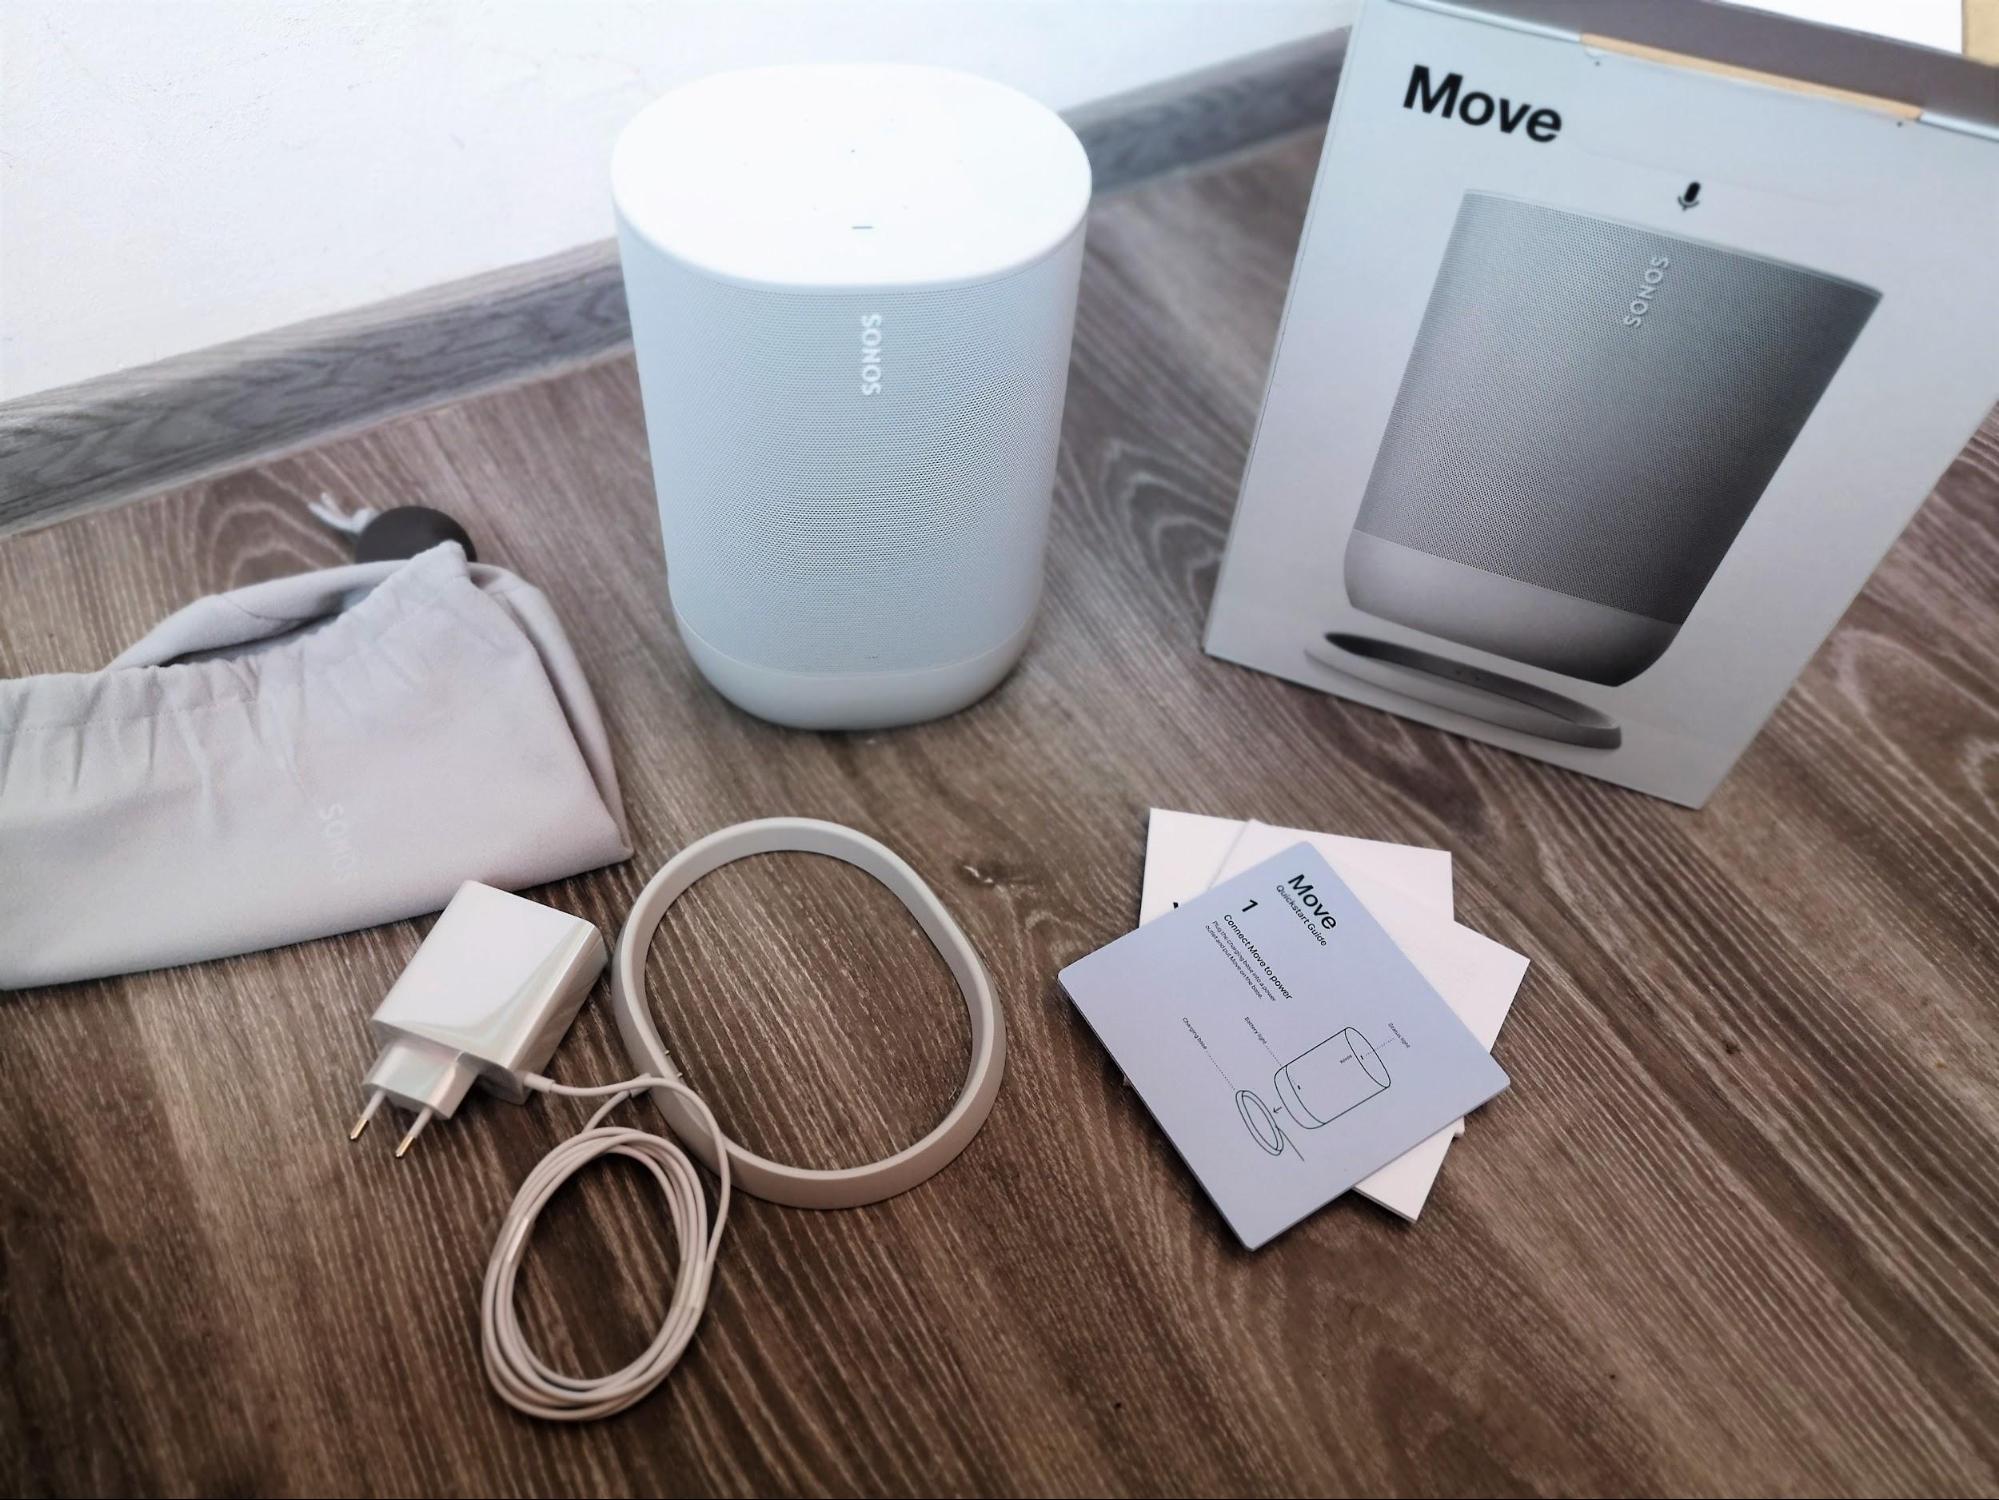 Sonos Move: What's inside the box